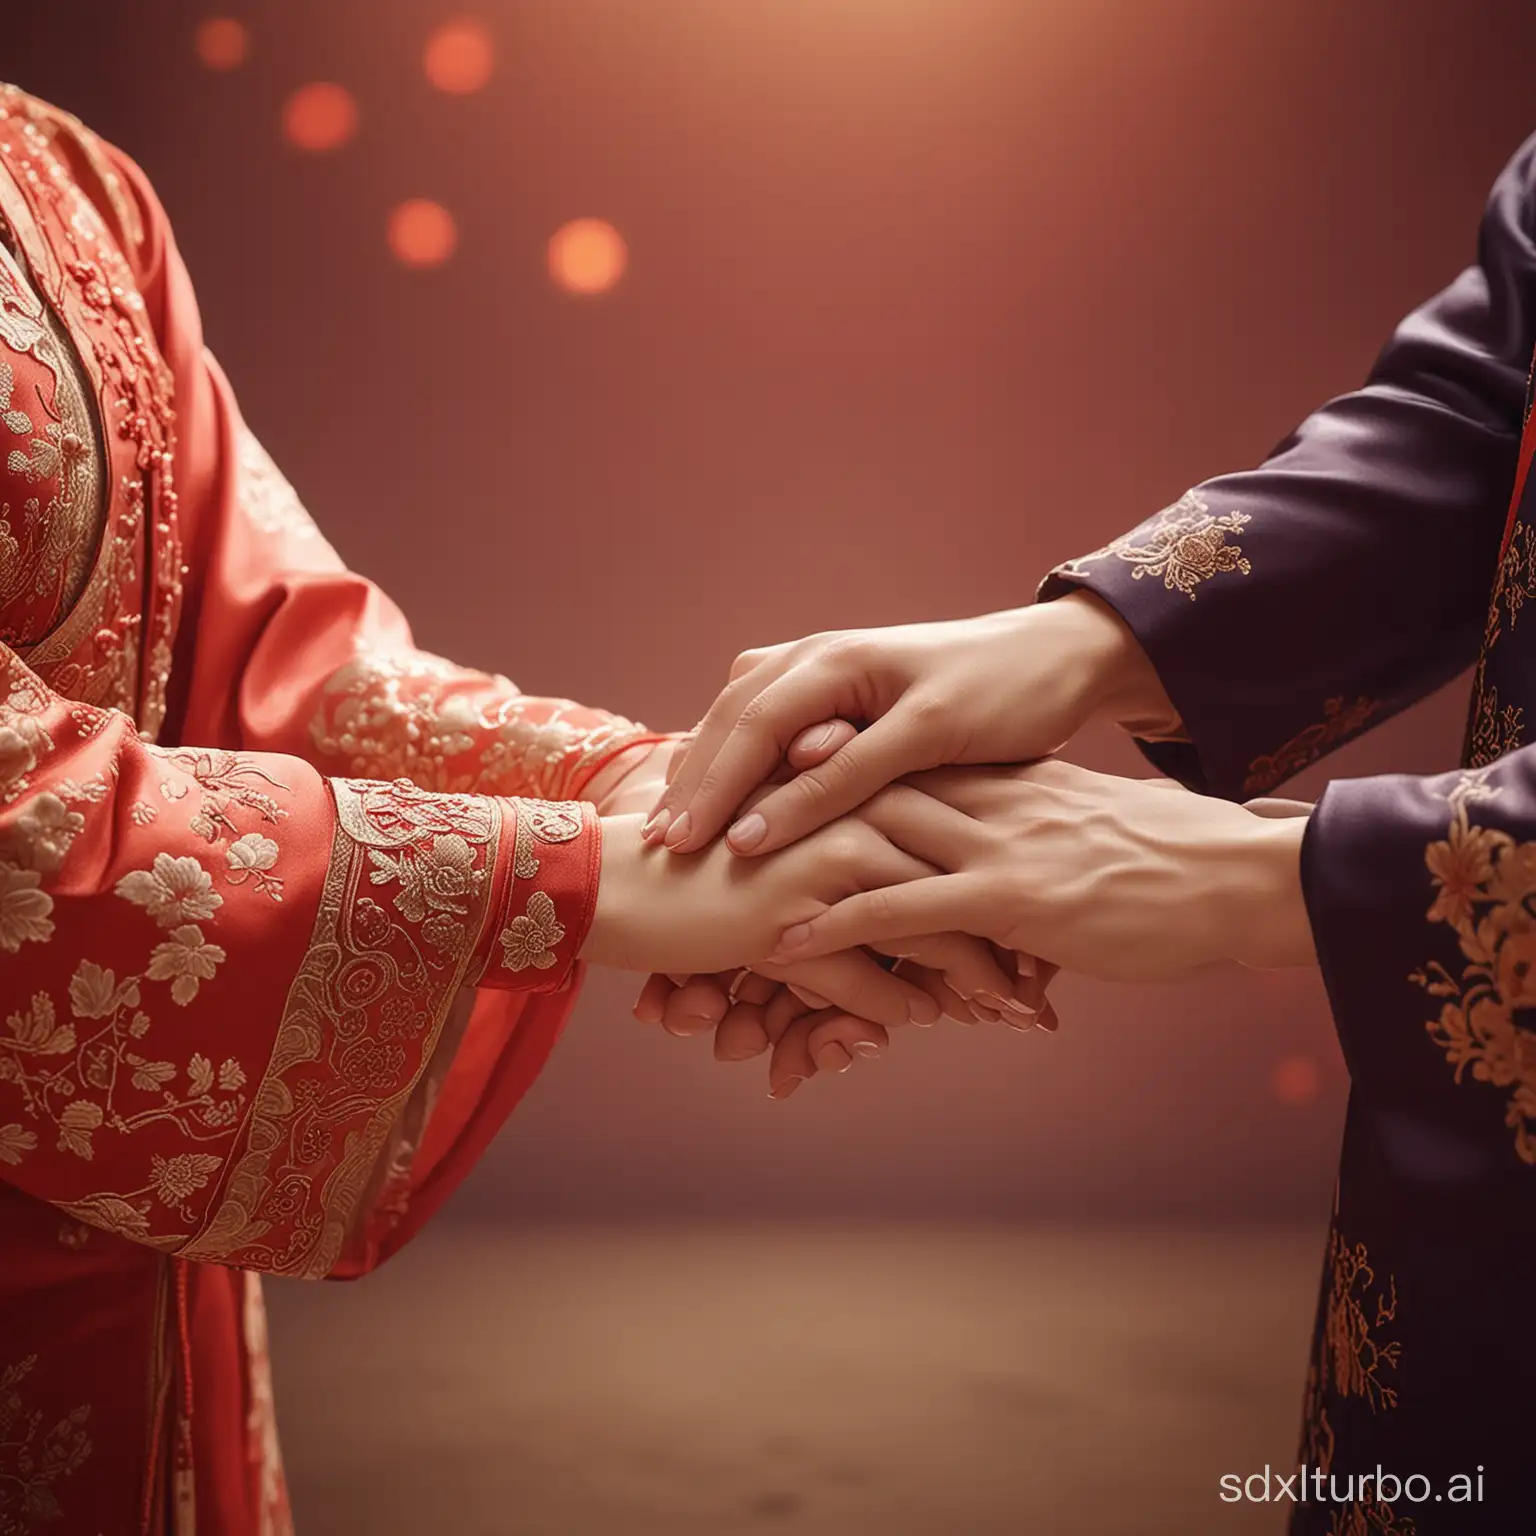 Chinese-style clothing, festive, couples, close-up of holding hands, romantic and warm background, cinematic quality, rich details, high-definition image